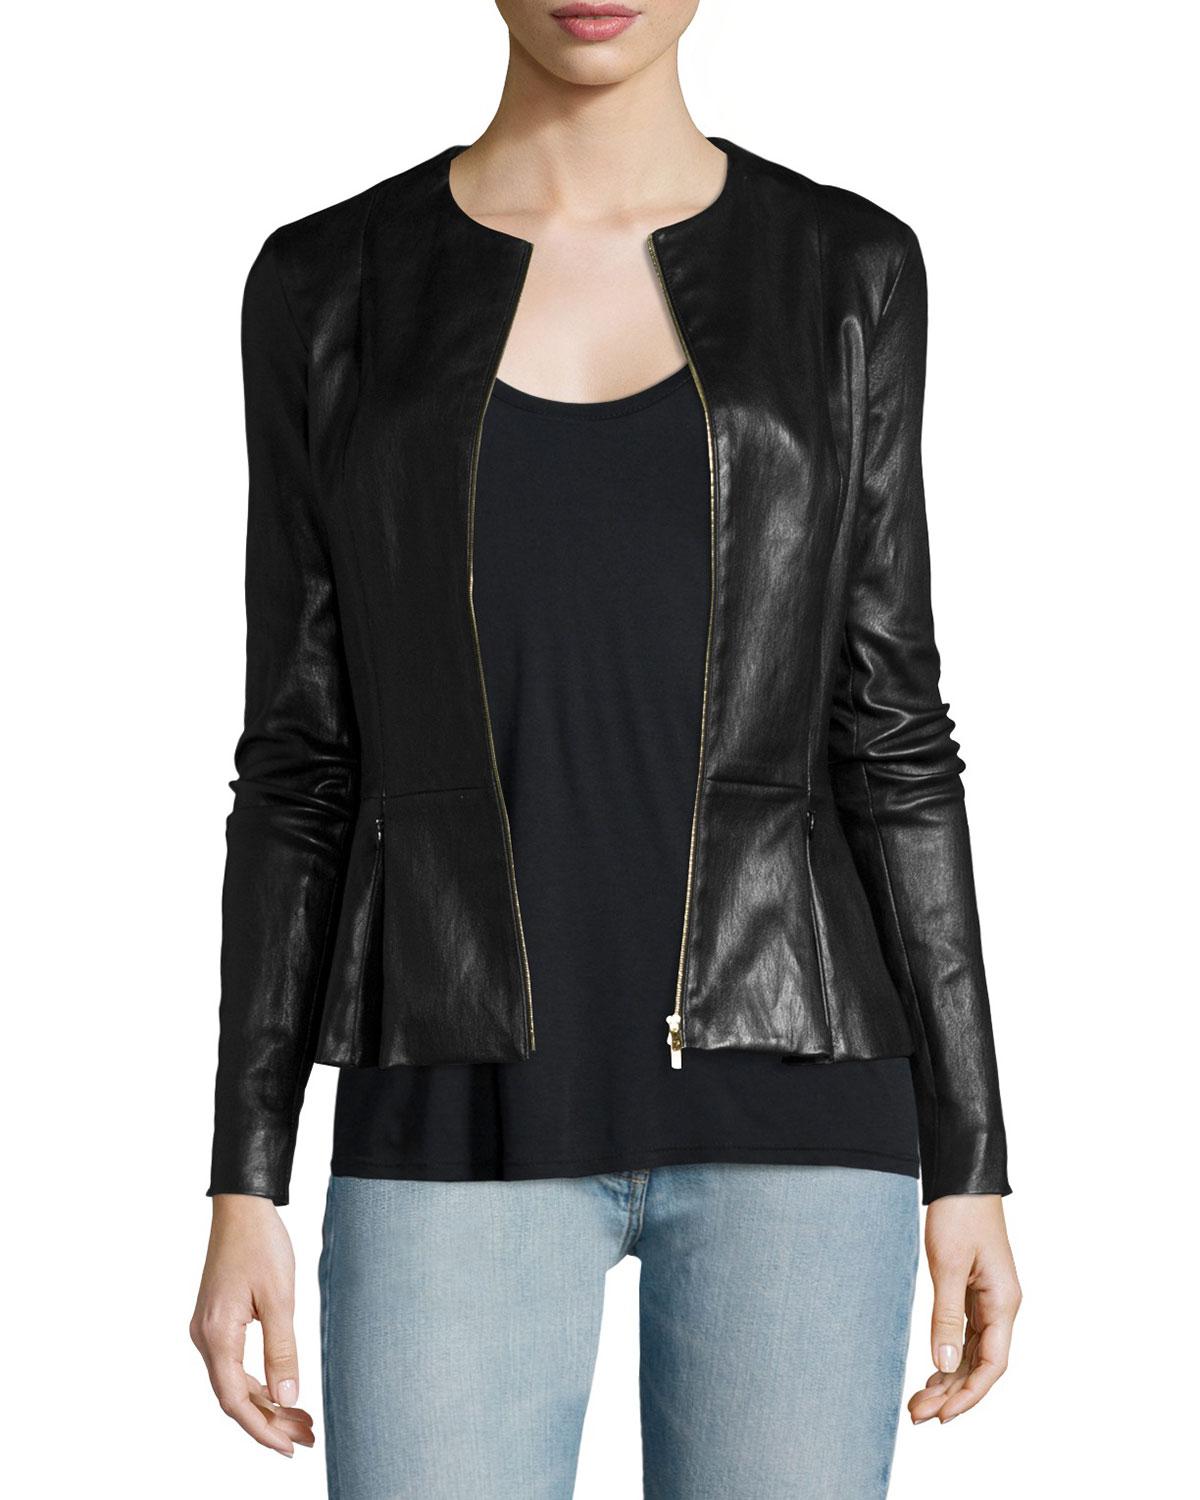 Lyst - The Row Anasta Zip-front Leather Jacket Black in Black